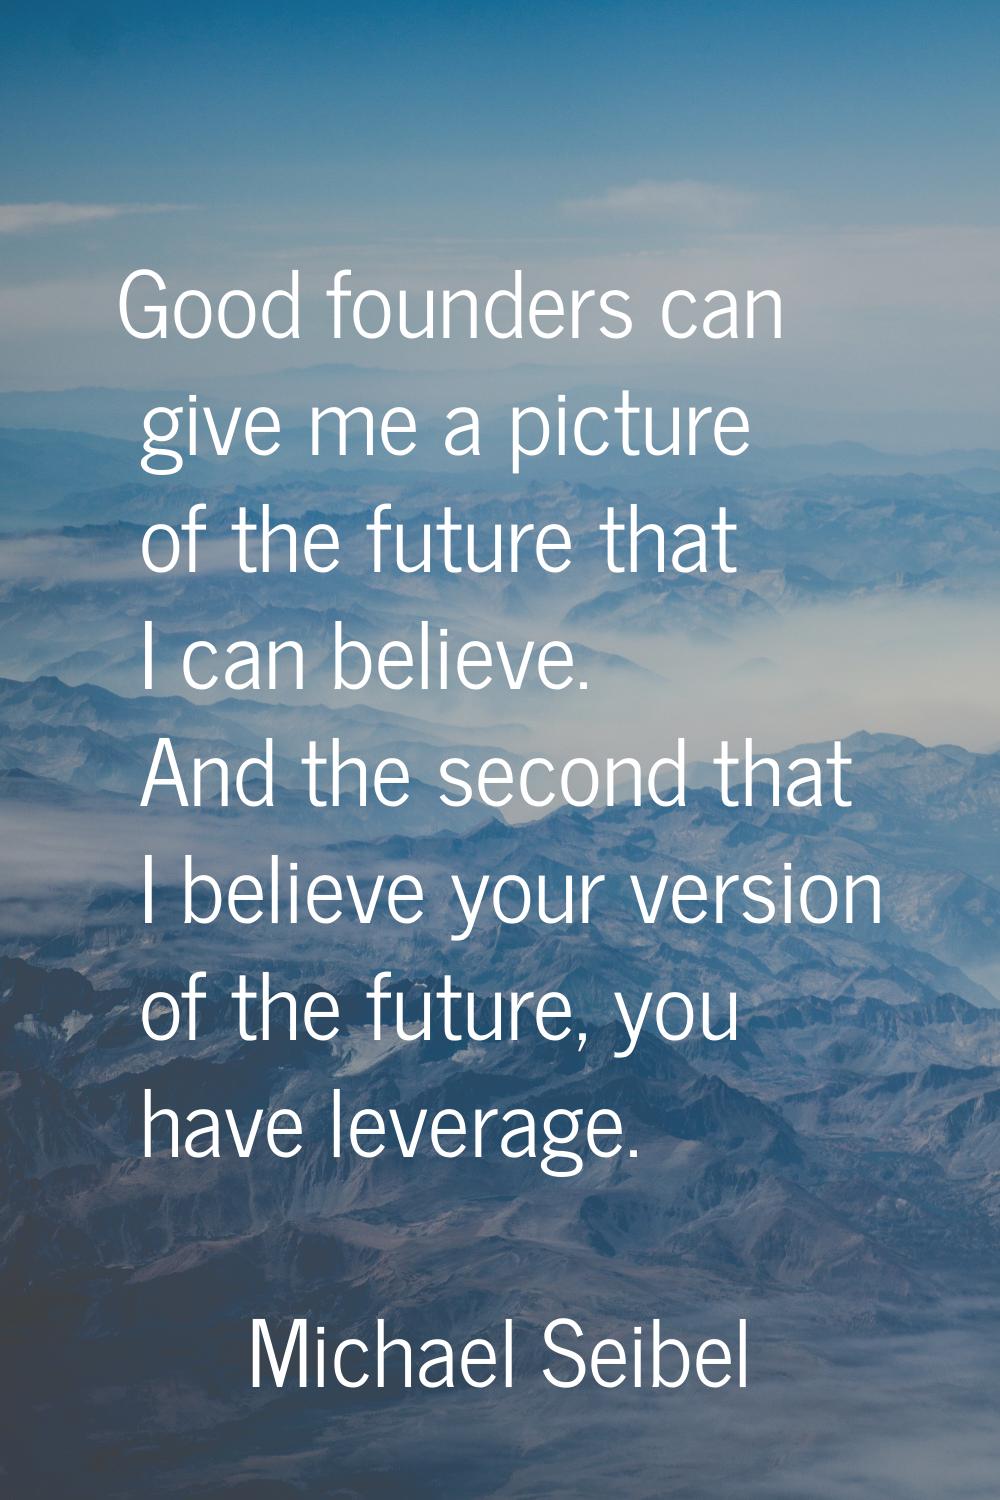 Good founders can give me a picture of the future that I can believe. And the second that I believe